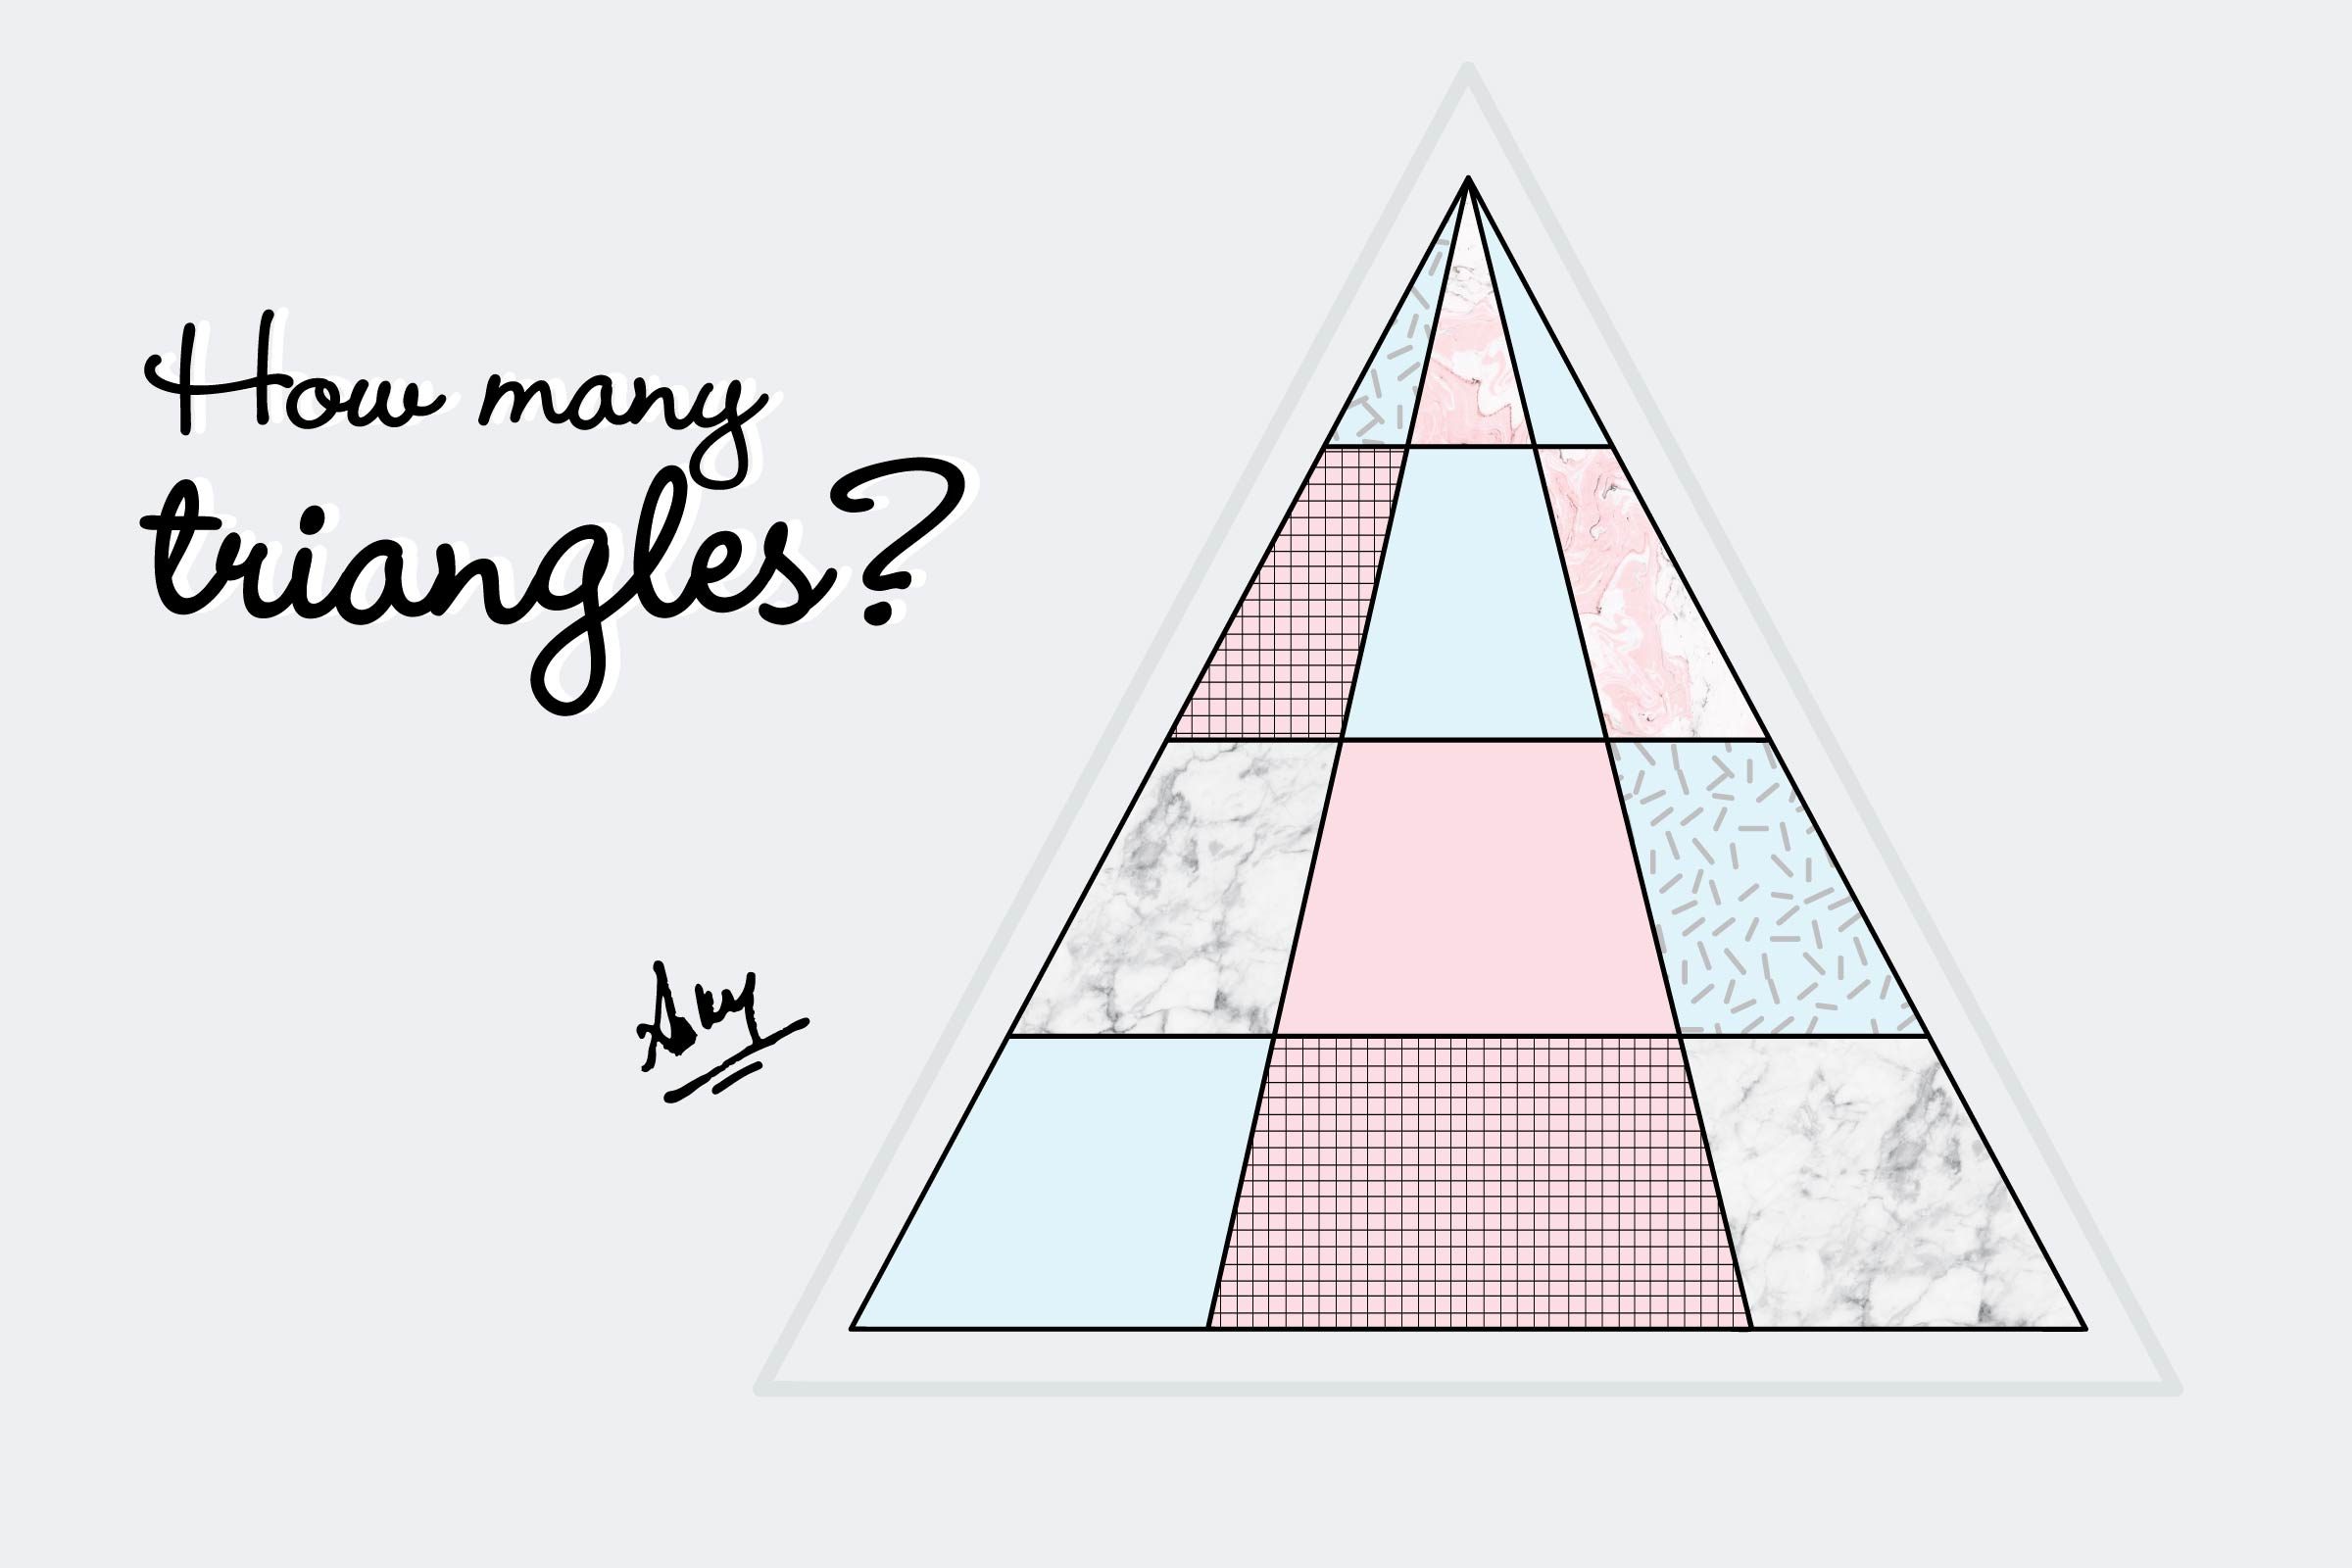 The-Internet-Can't-Figure-Out-How-Many-Triangles-There-Are-in-This-Image